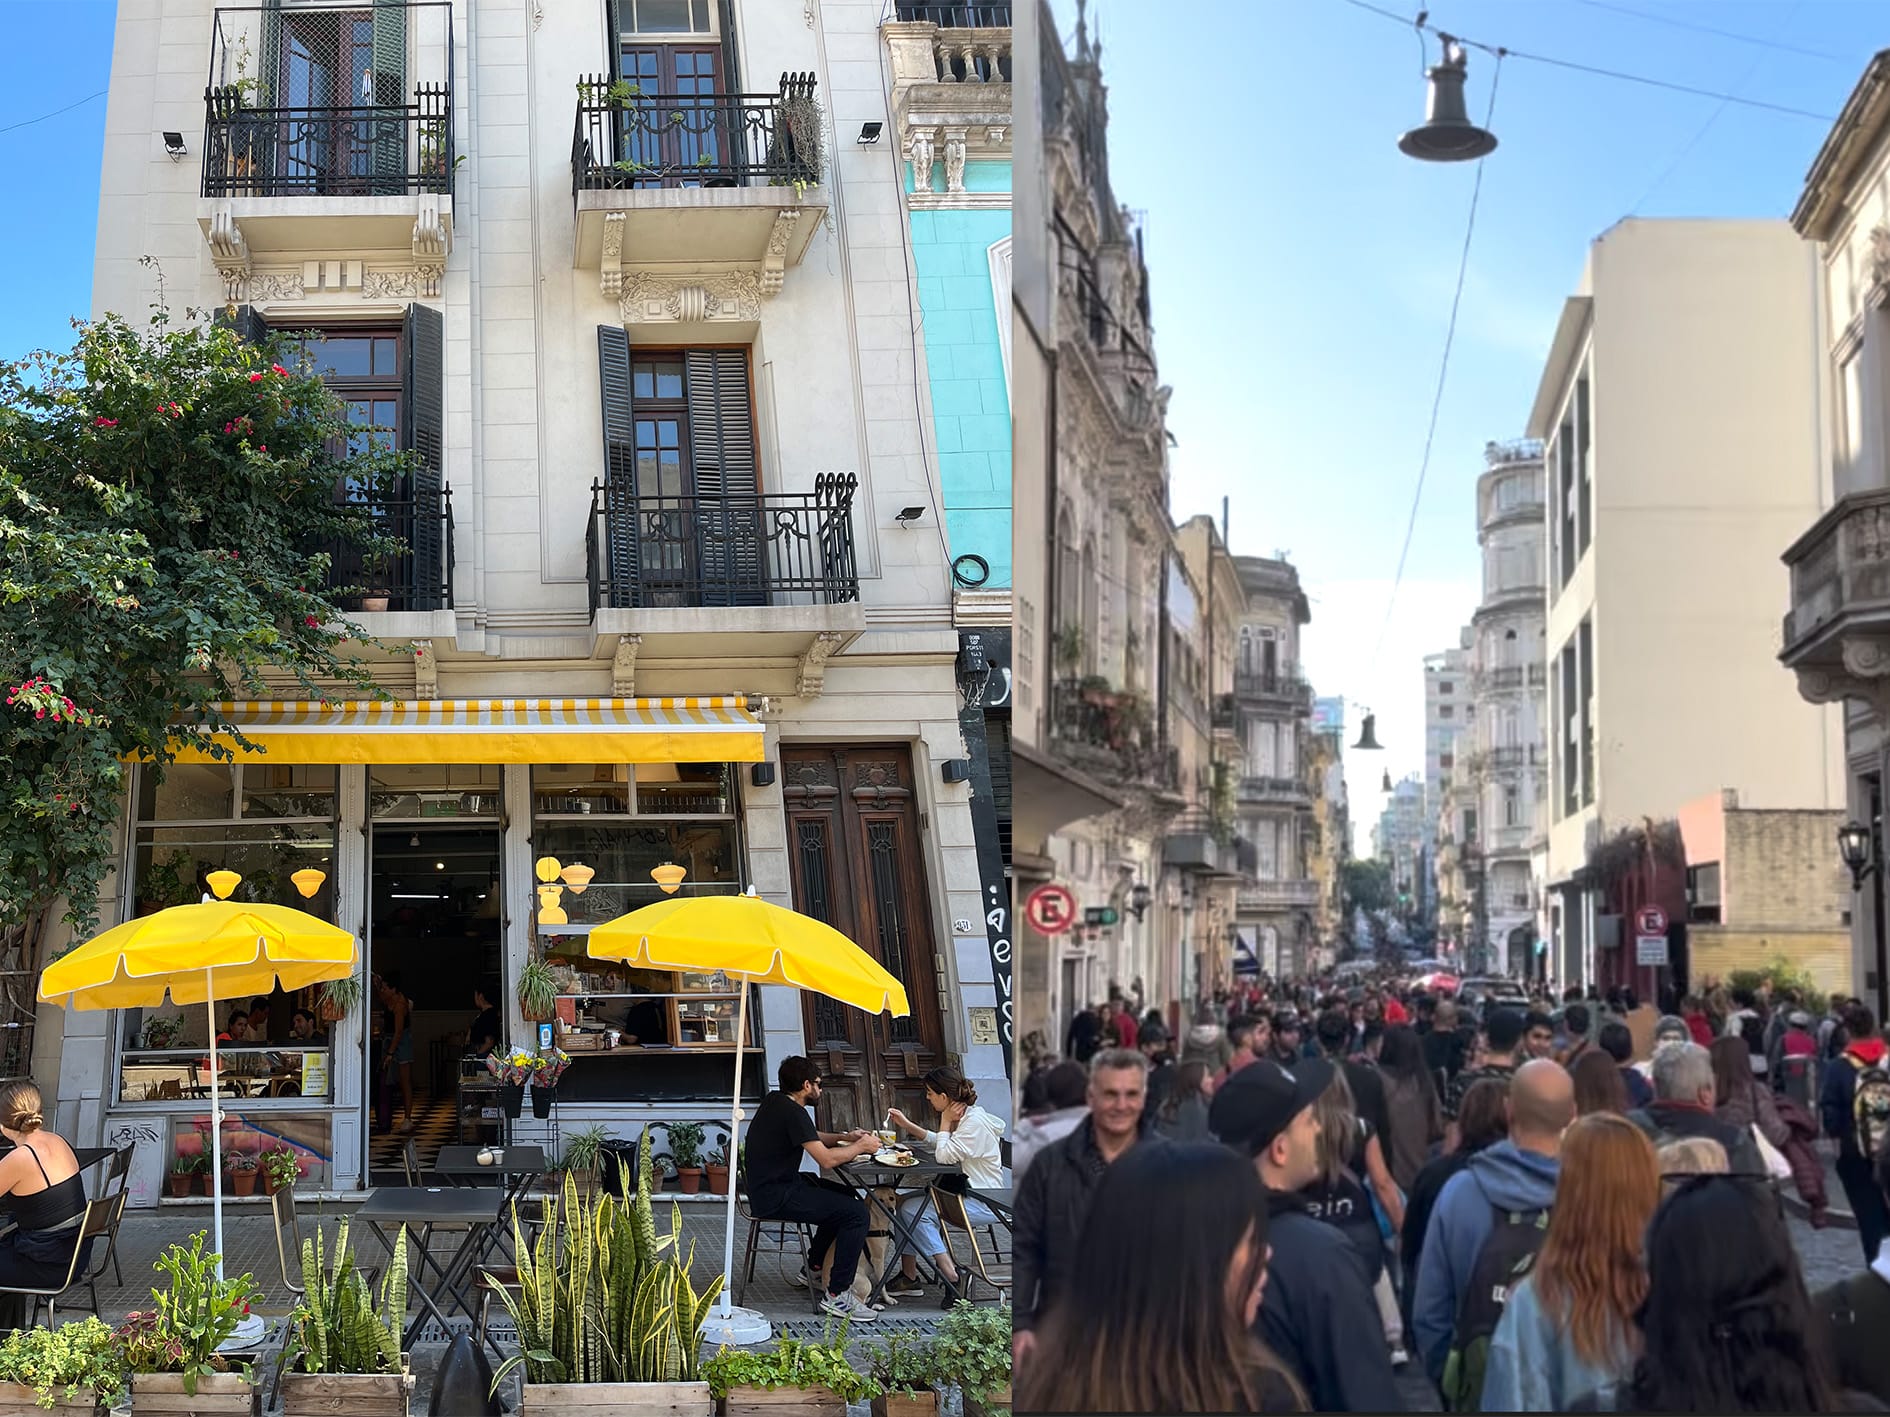 Where to stay in Buenos Aires - San Telmo